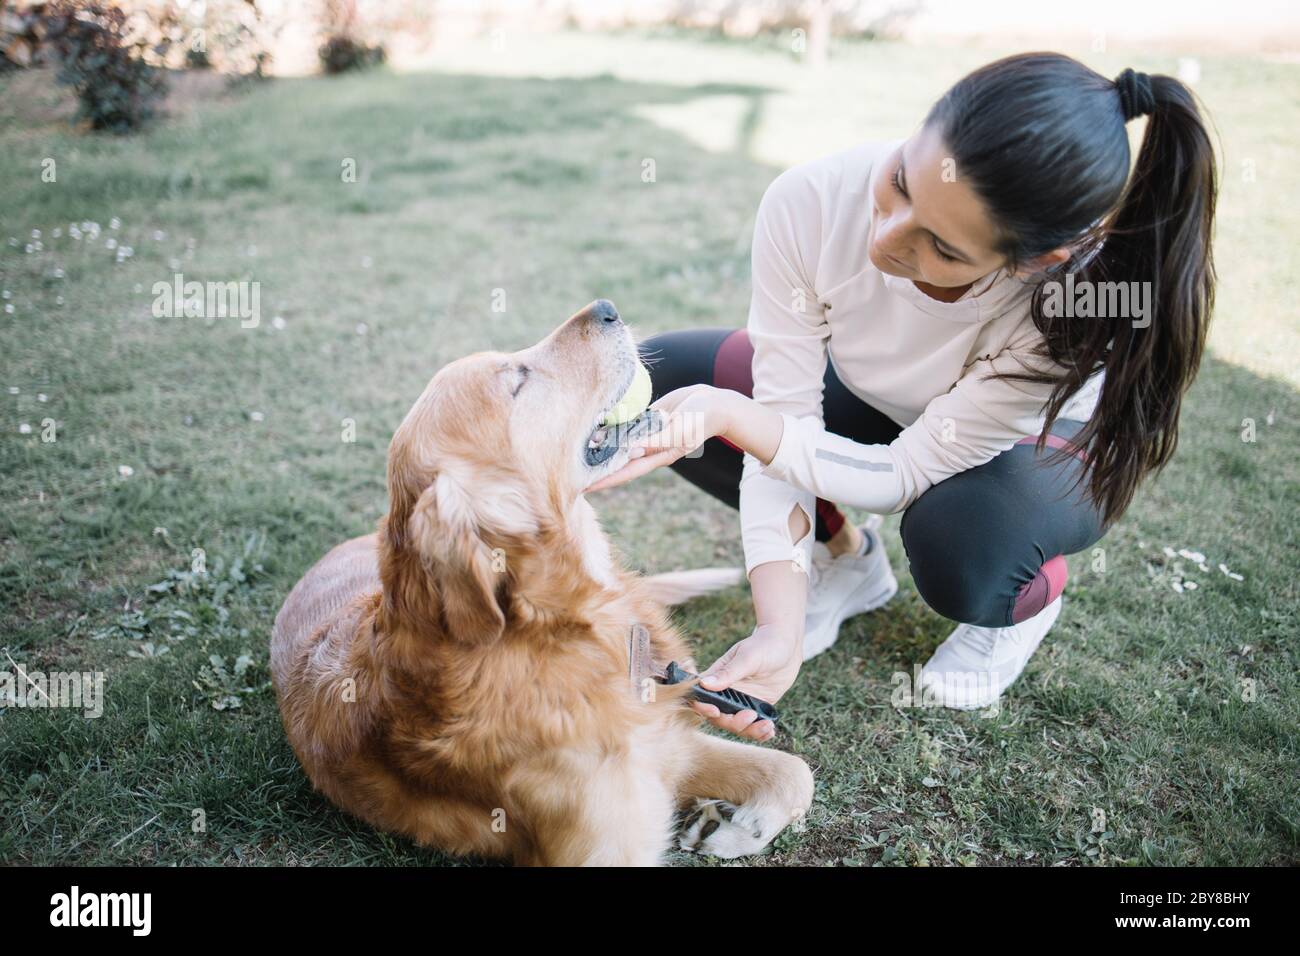 Pretty girl combing fur of dog outdoor Stock Photo